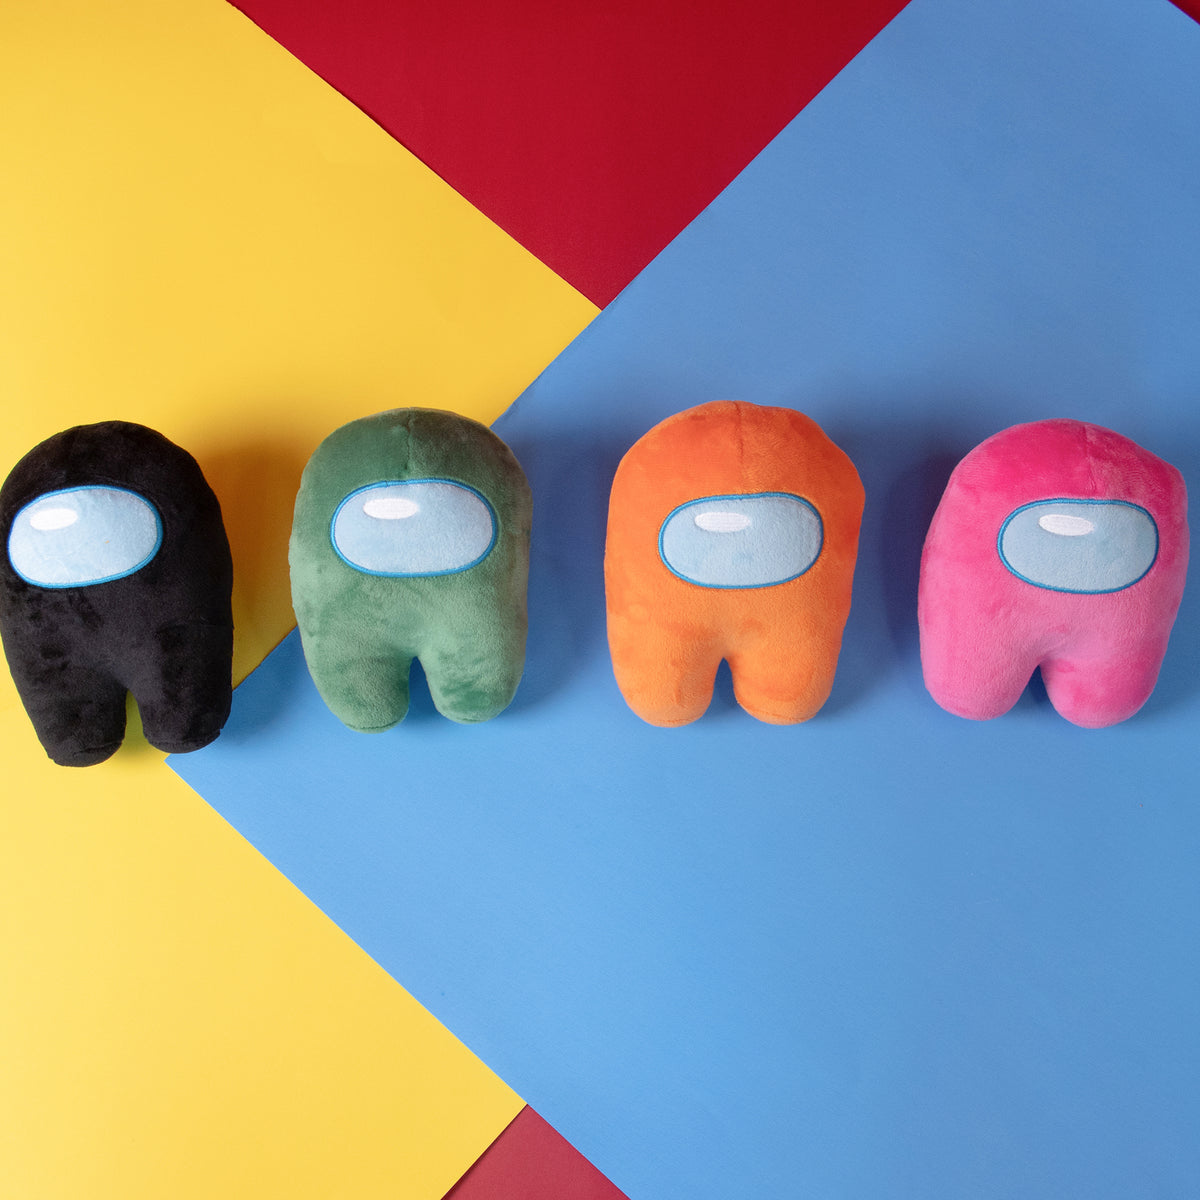 Lifestyle Photograph of a Black, Green, Orange, and Pink Crewmate Plush by Frisk Wolfie Standing in a row against a yellow, red, blue color blocked background. 